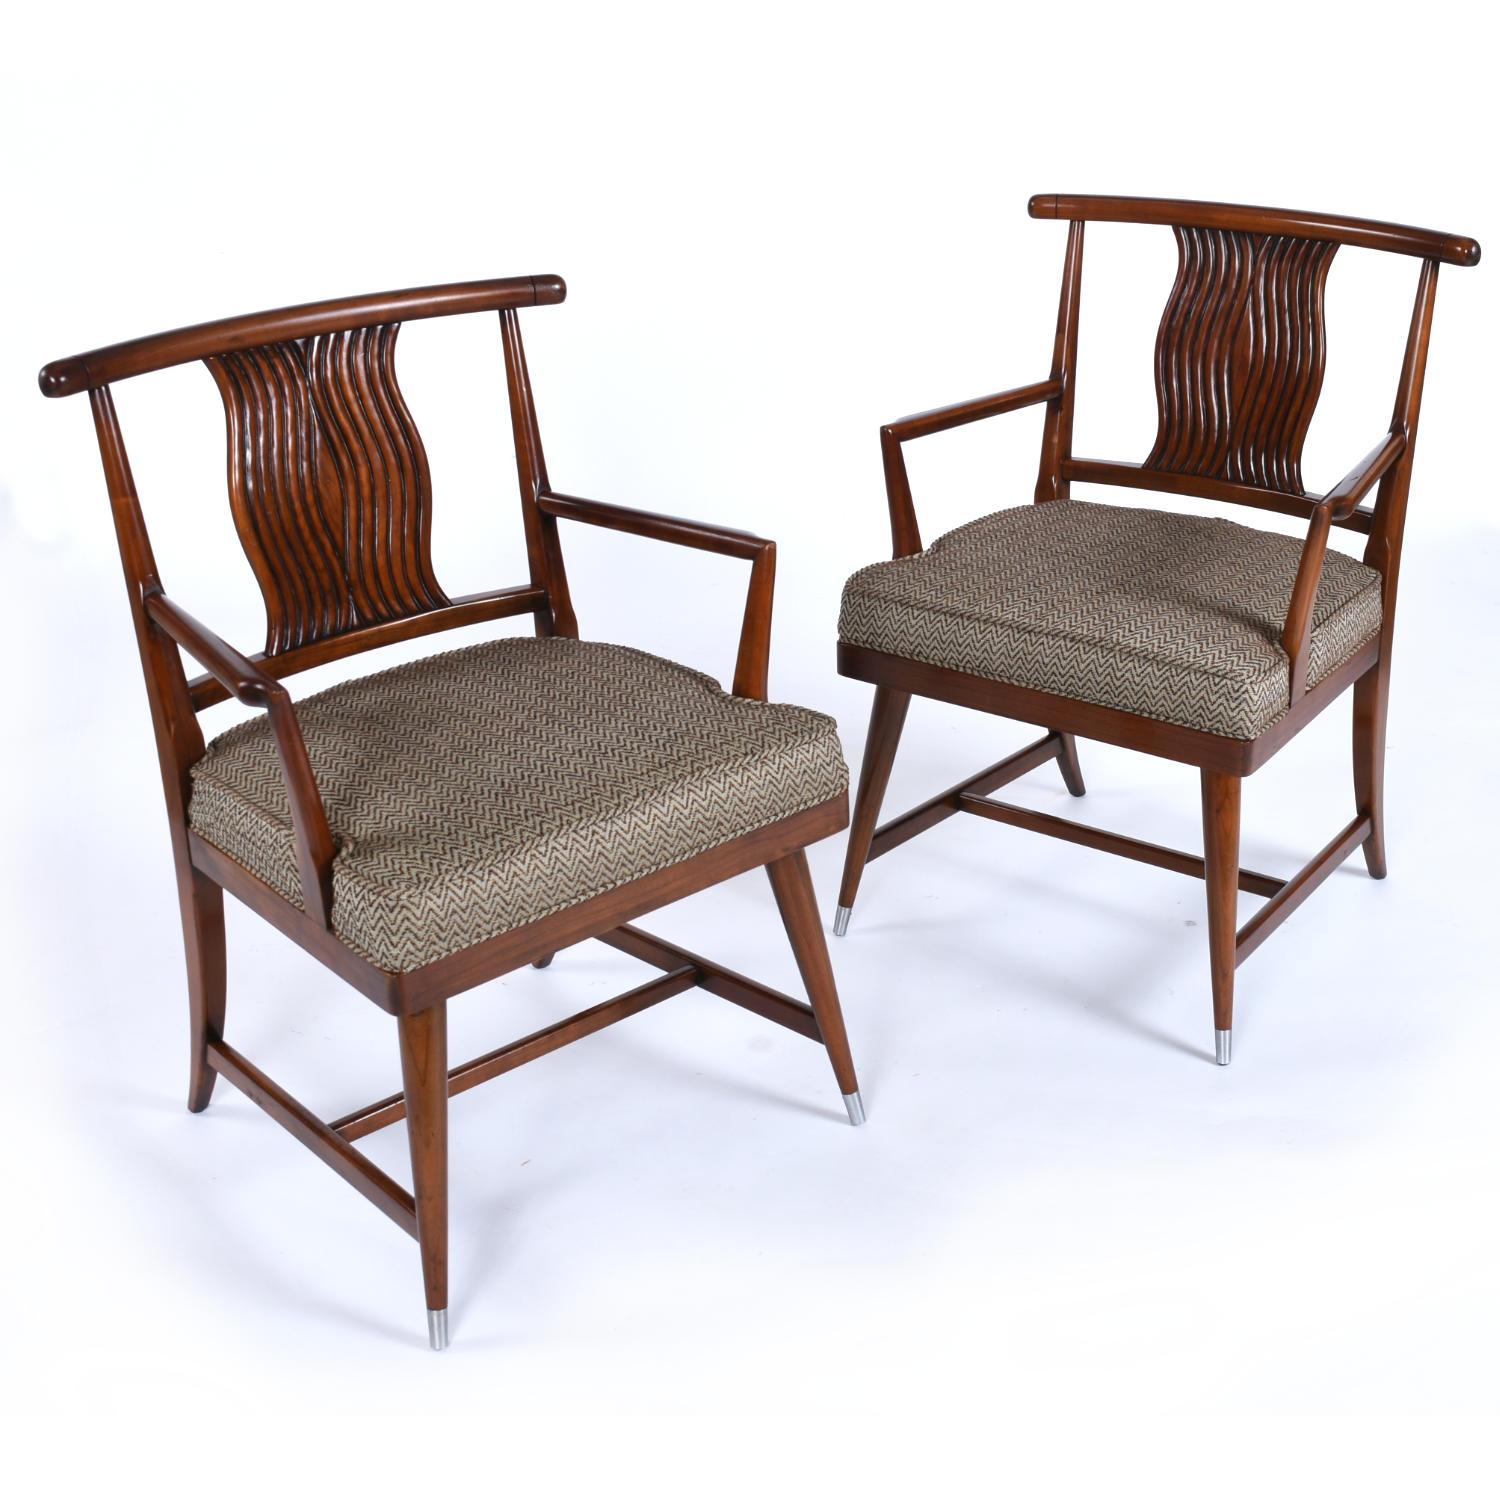 Mid-20th Century Mid-Century Modern Asian Chinoiserie Sabre Leg Walnut Dining Chairs